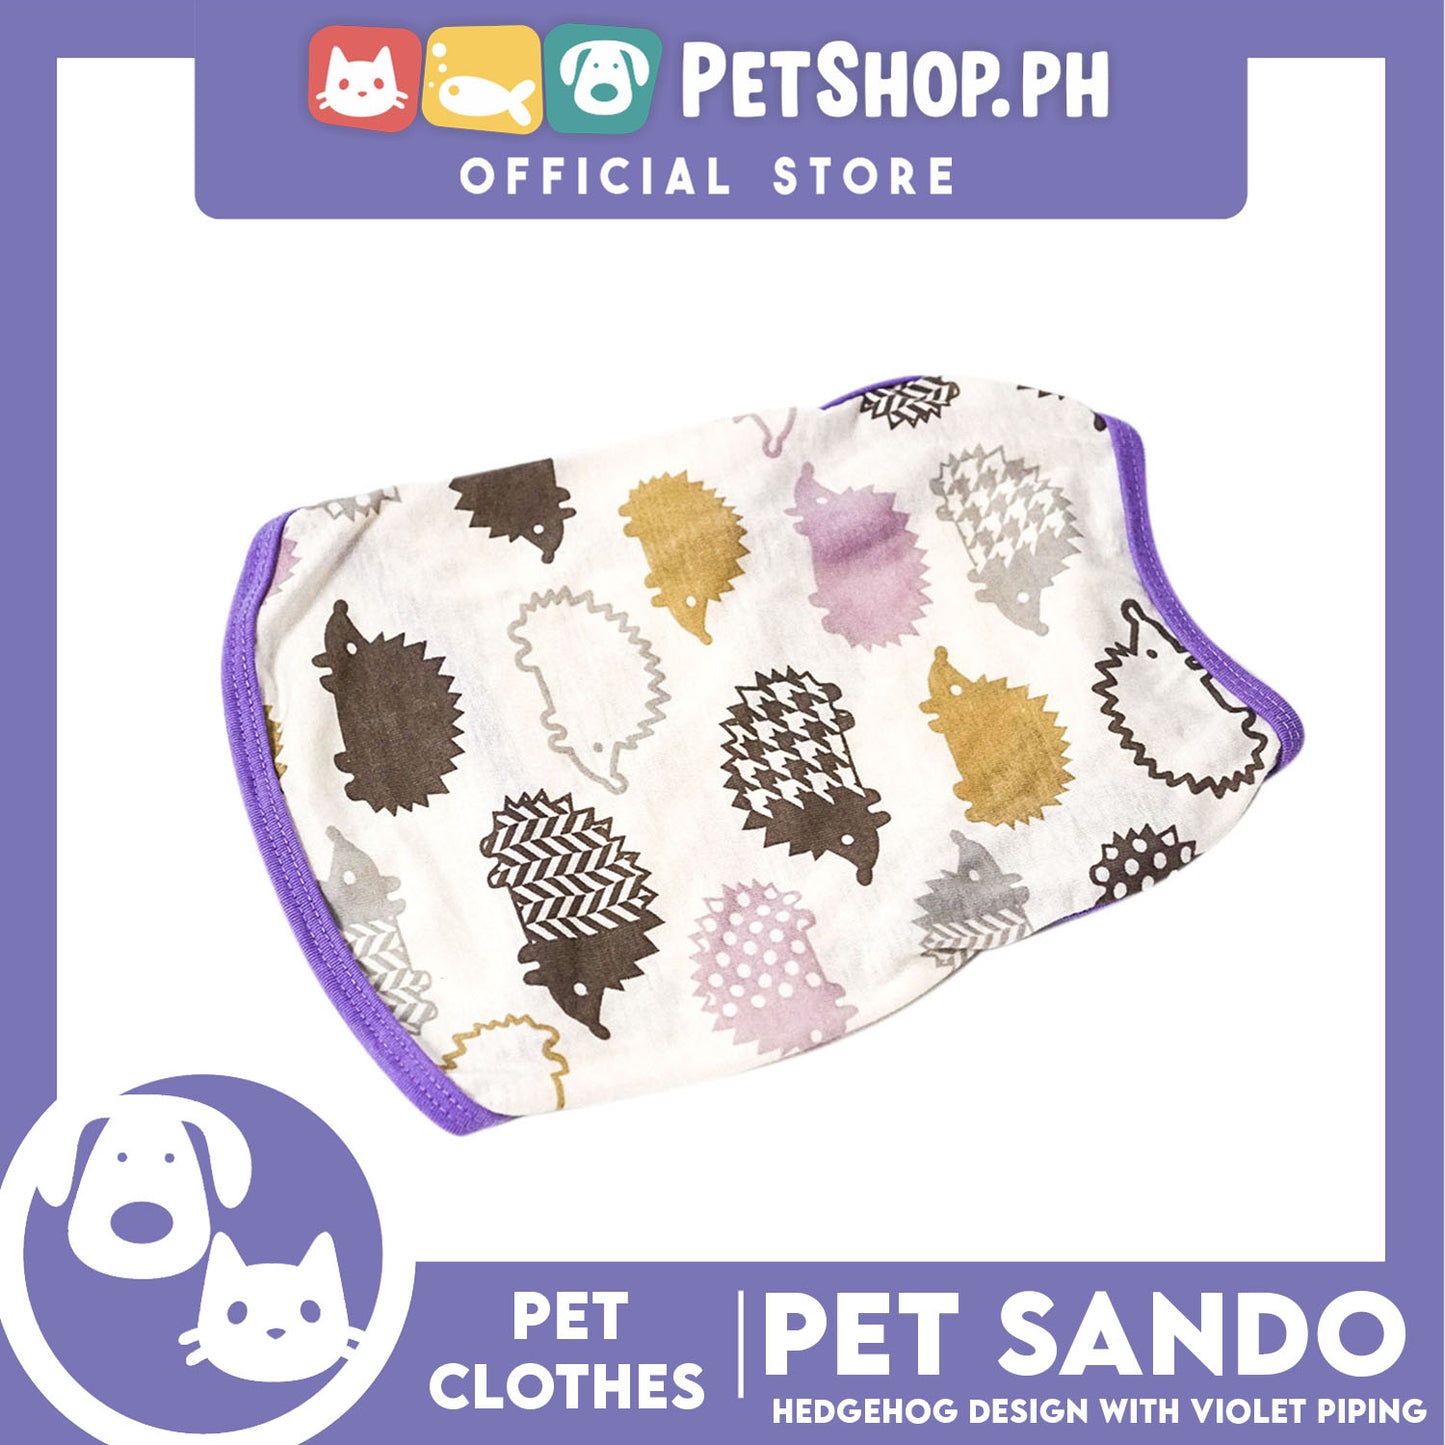 Pet Sando Hedgehog Design with violet piping (Medium) Pet Clothes Perfect Fit for Dogs